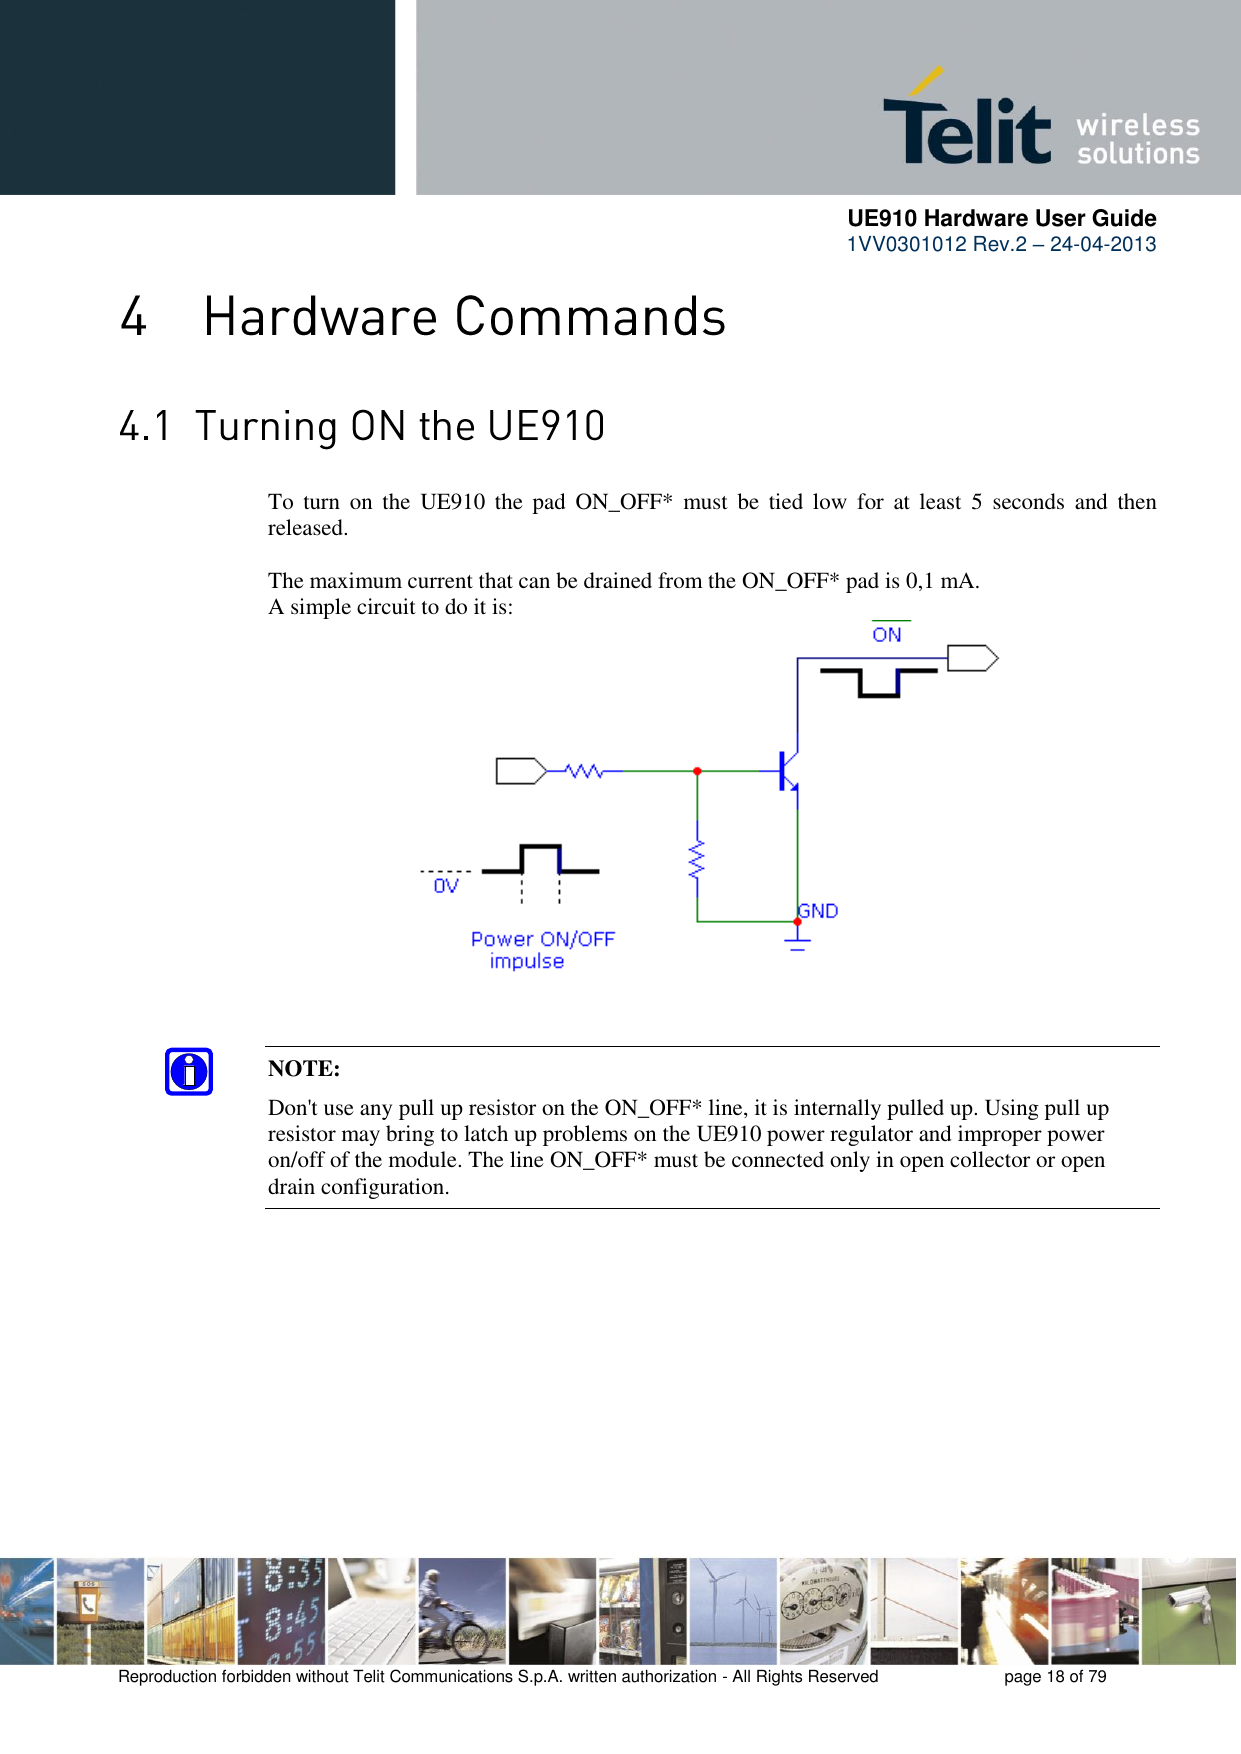      UE910 Hardware User Guide  1VV0301012 Rev.2 – 24-04-2013    Reproduction forbidden without Telit Communications S.p.A. written authorization - All Rights Reserved    page 18 of 79    To  turn  on  the  UE910  the  pad  ON_OFF*  must  be  tied  low  for  at  least  5  seconds  and  then released.  The maximum current that can be drained from the ON_OFF* pad is 0,1 mA. A simple circuit to do it is: NOTE: Don&apos;t use any pull up resistor on the ON_OFF* line, it is internally pulled up. Using pull up resistor may bring to latch up problems on the UE910 power regulator and improper power on/off of the module. The line ON_OFF* must be connected only in open collector or open drain configuration. 